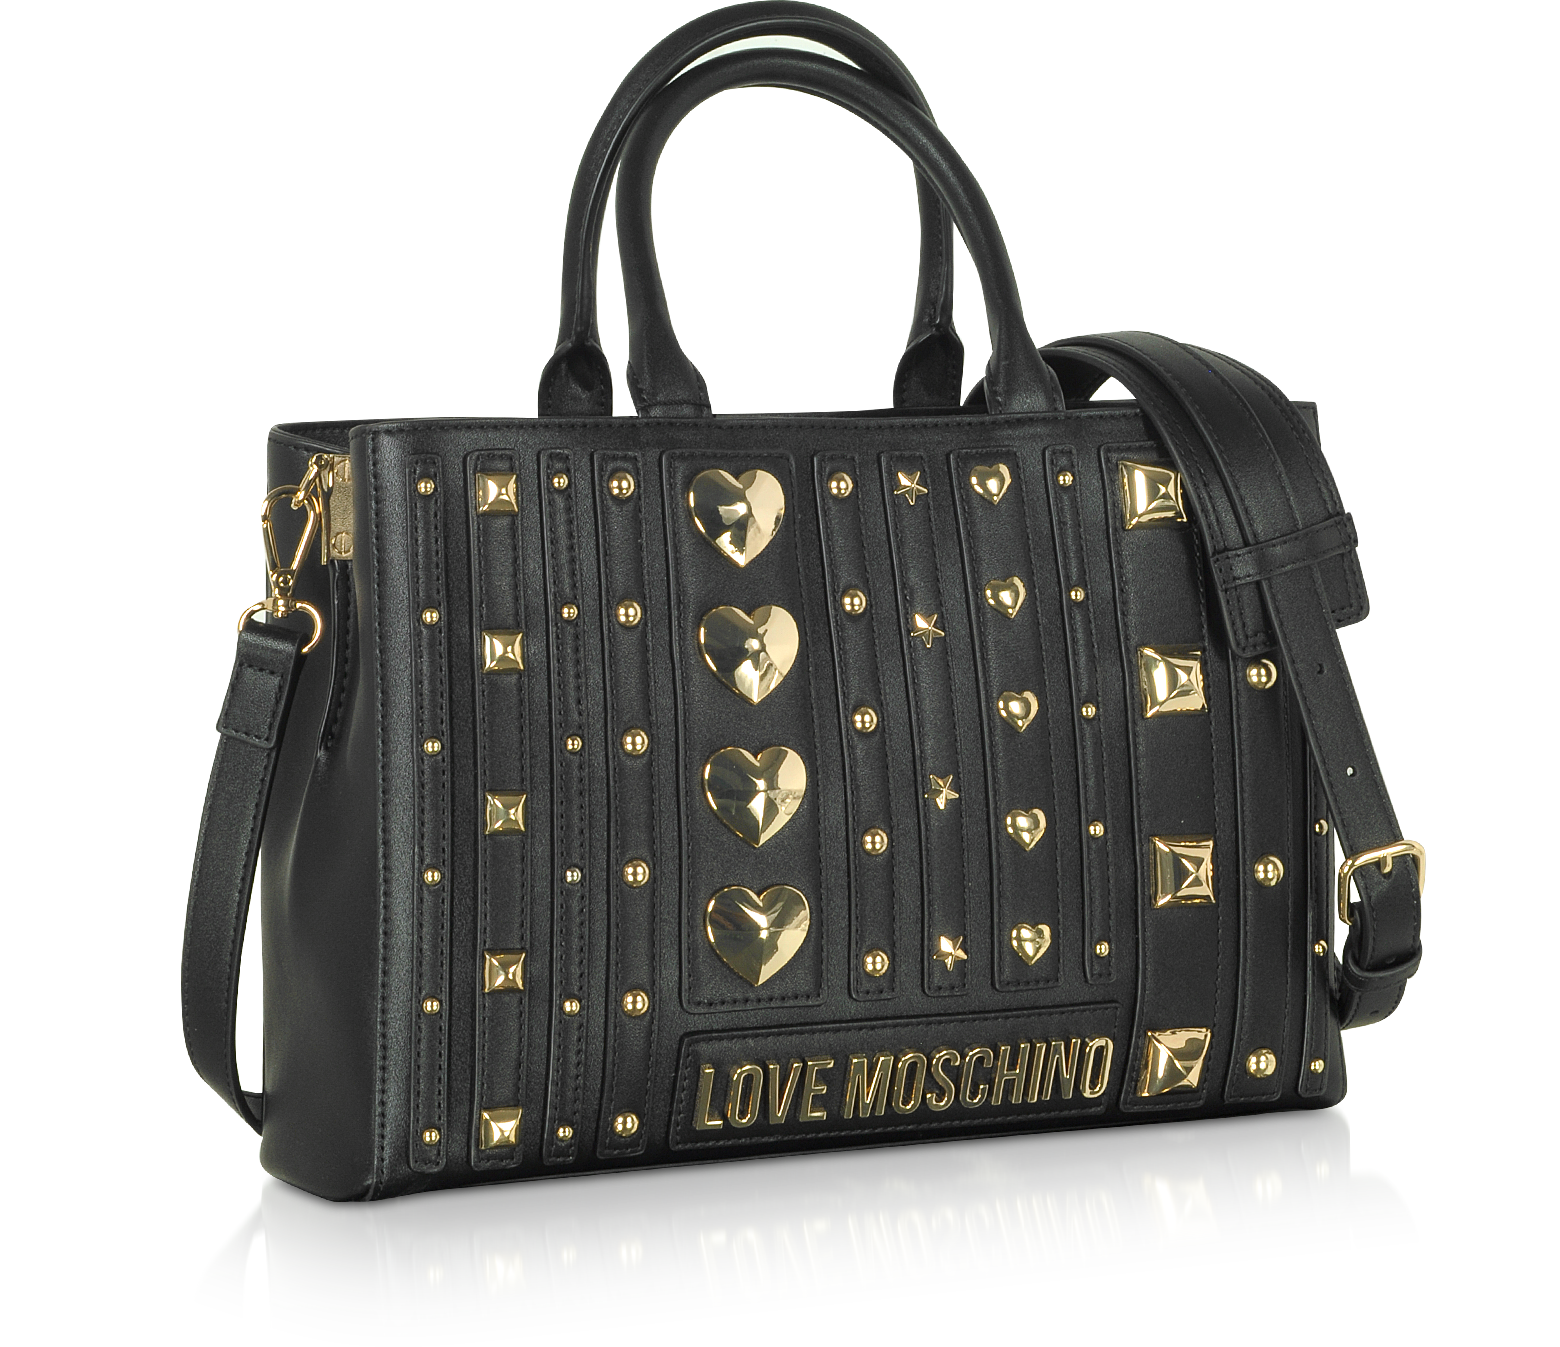 Love Moschino Black Eco- Leather Studded Tote Bag at FORZIERI